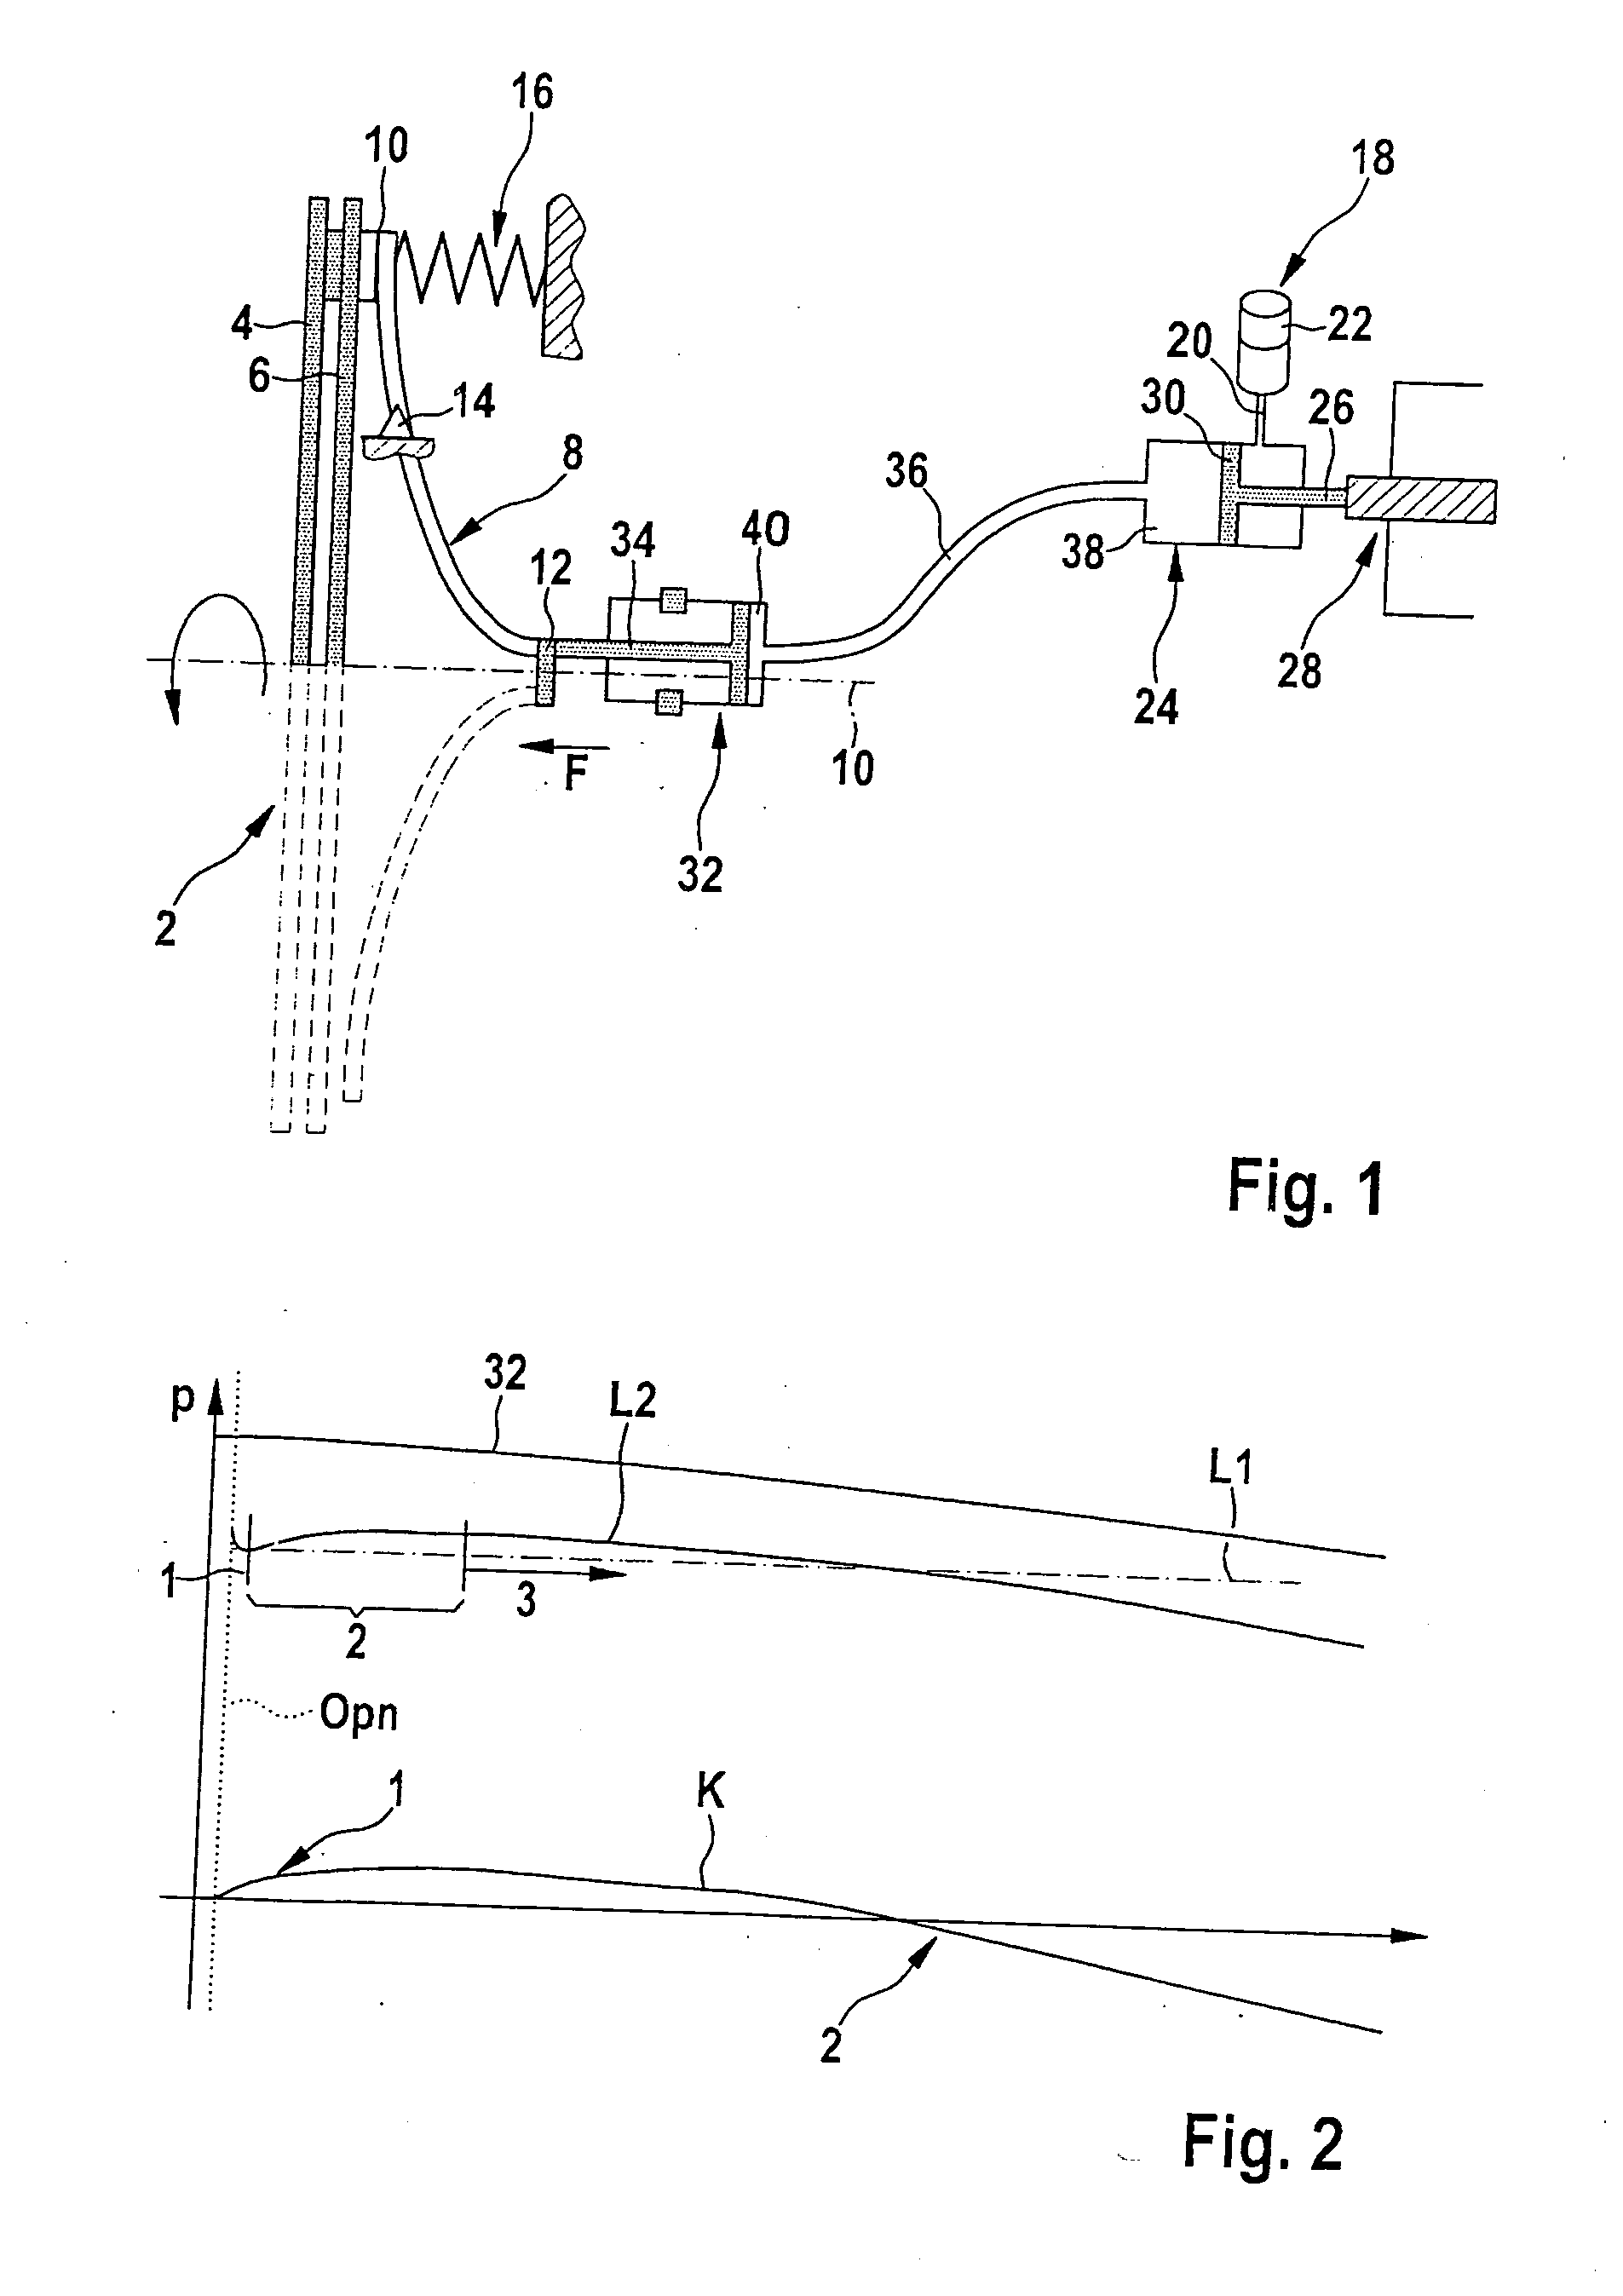 Method for compensating for volume changes of an hydraulic fluid in an hydraulic actuating device for actuating a clutch, and hydraulic actuating device